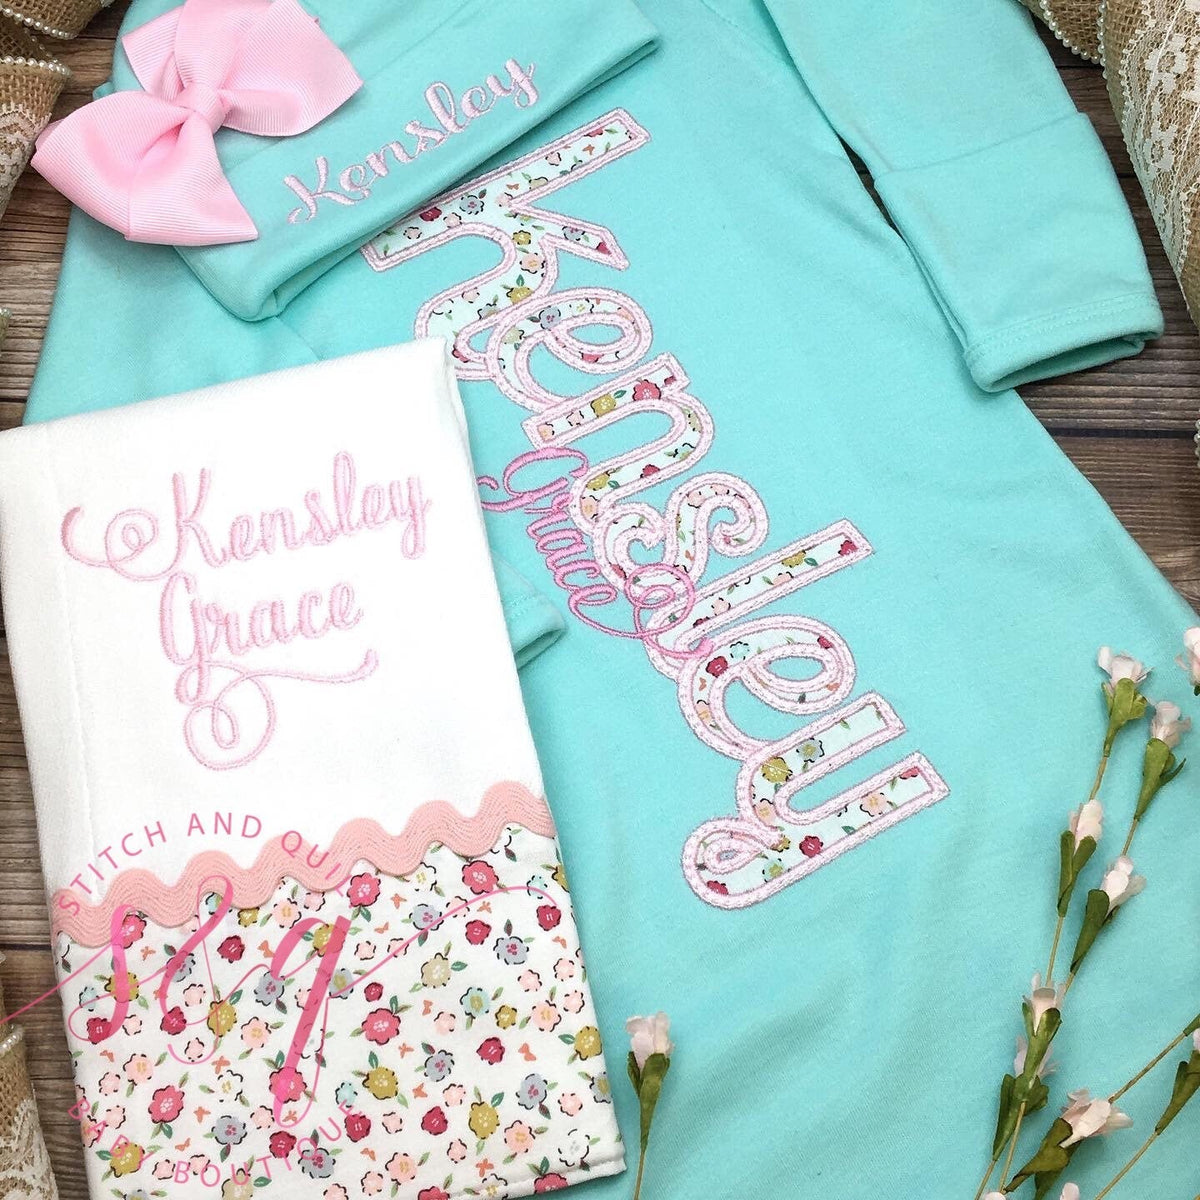 Mint and Pink Coming Home Outfit, Take Home Outfit, Going Home Outfit, Baby Girl Shower Gift